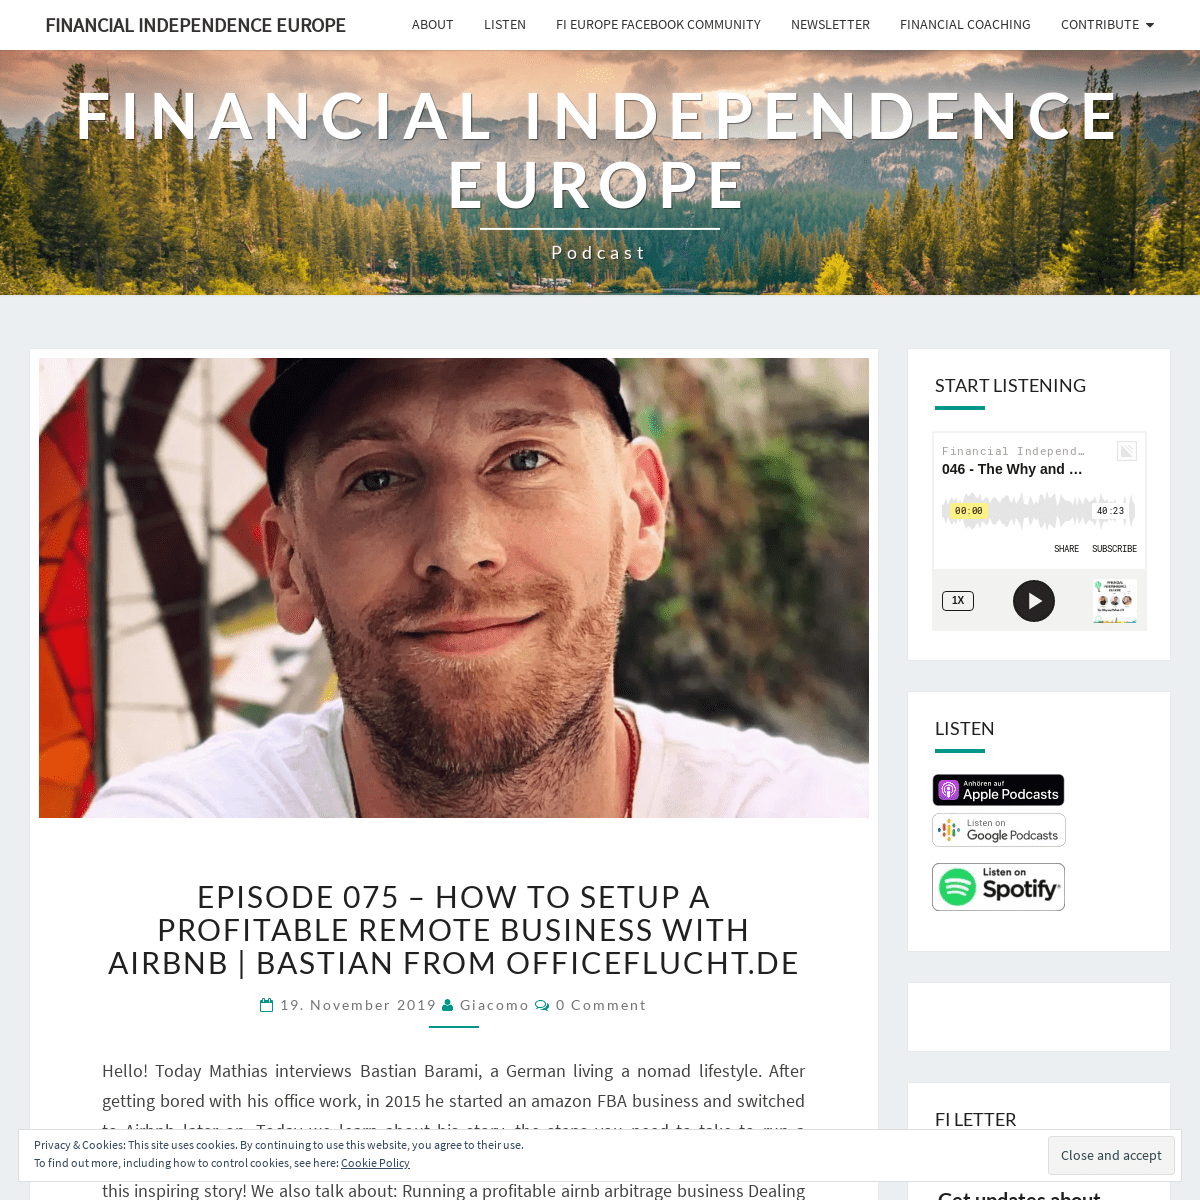 A complete backup of financial-independence.eu